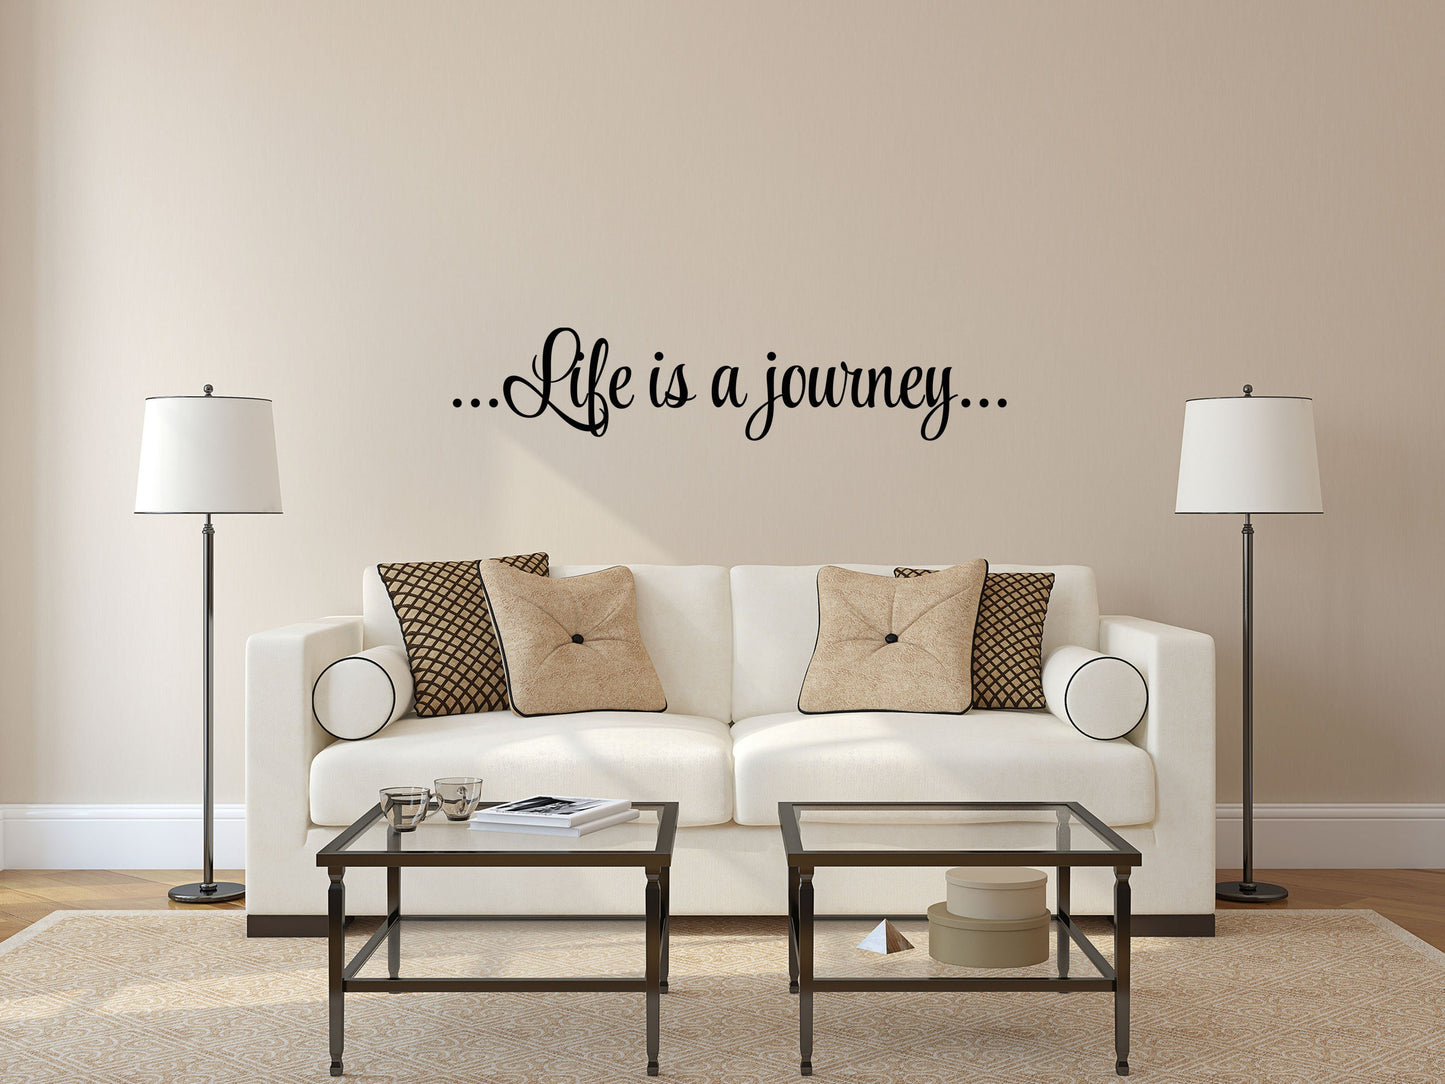 Life Is A Journey Vinyl Wall Decal - Inspirational Wall Signs Vinyl Wall Decal Done 